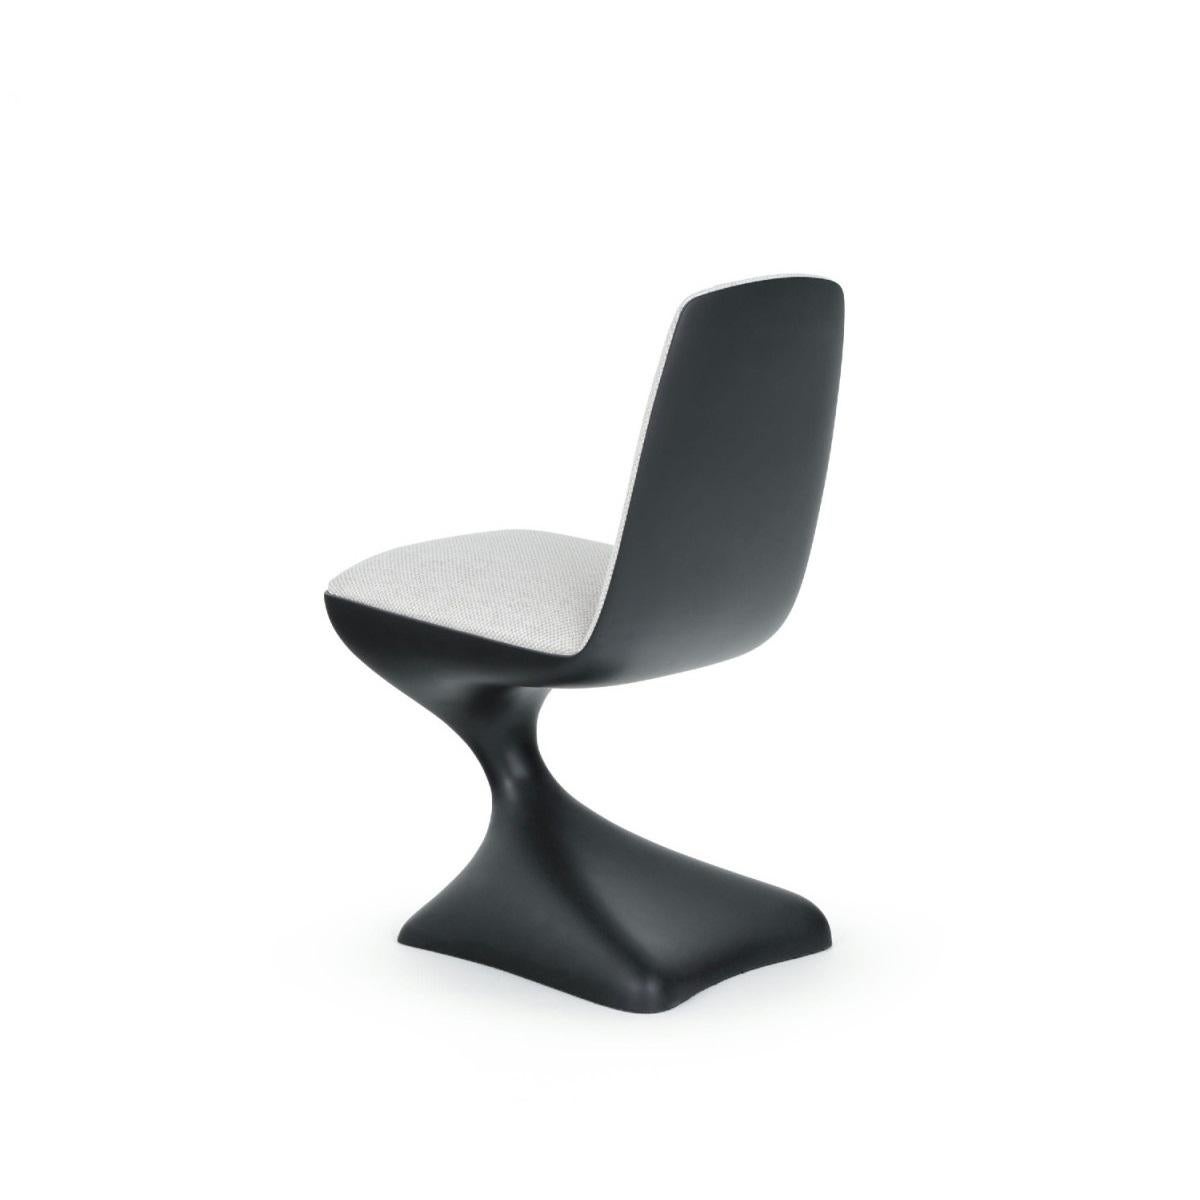 Modern S-Shaped Biomorphic Dining Chair In Matte Black For Sale